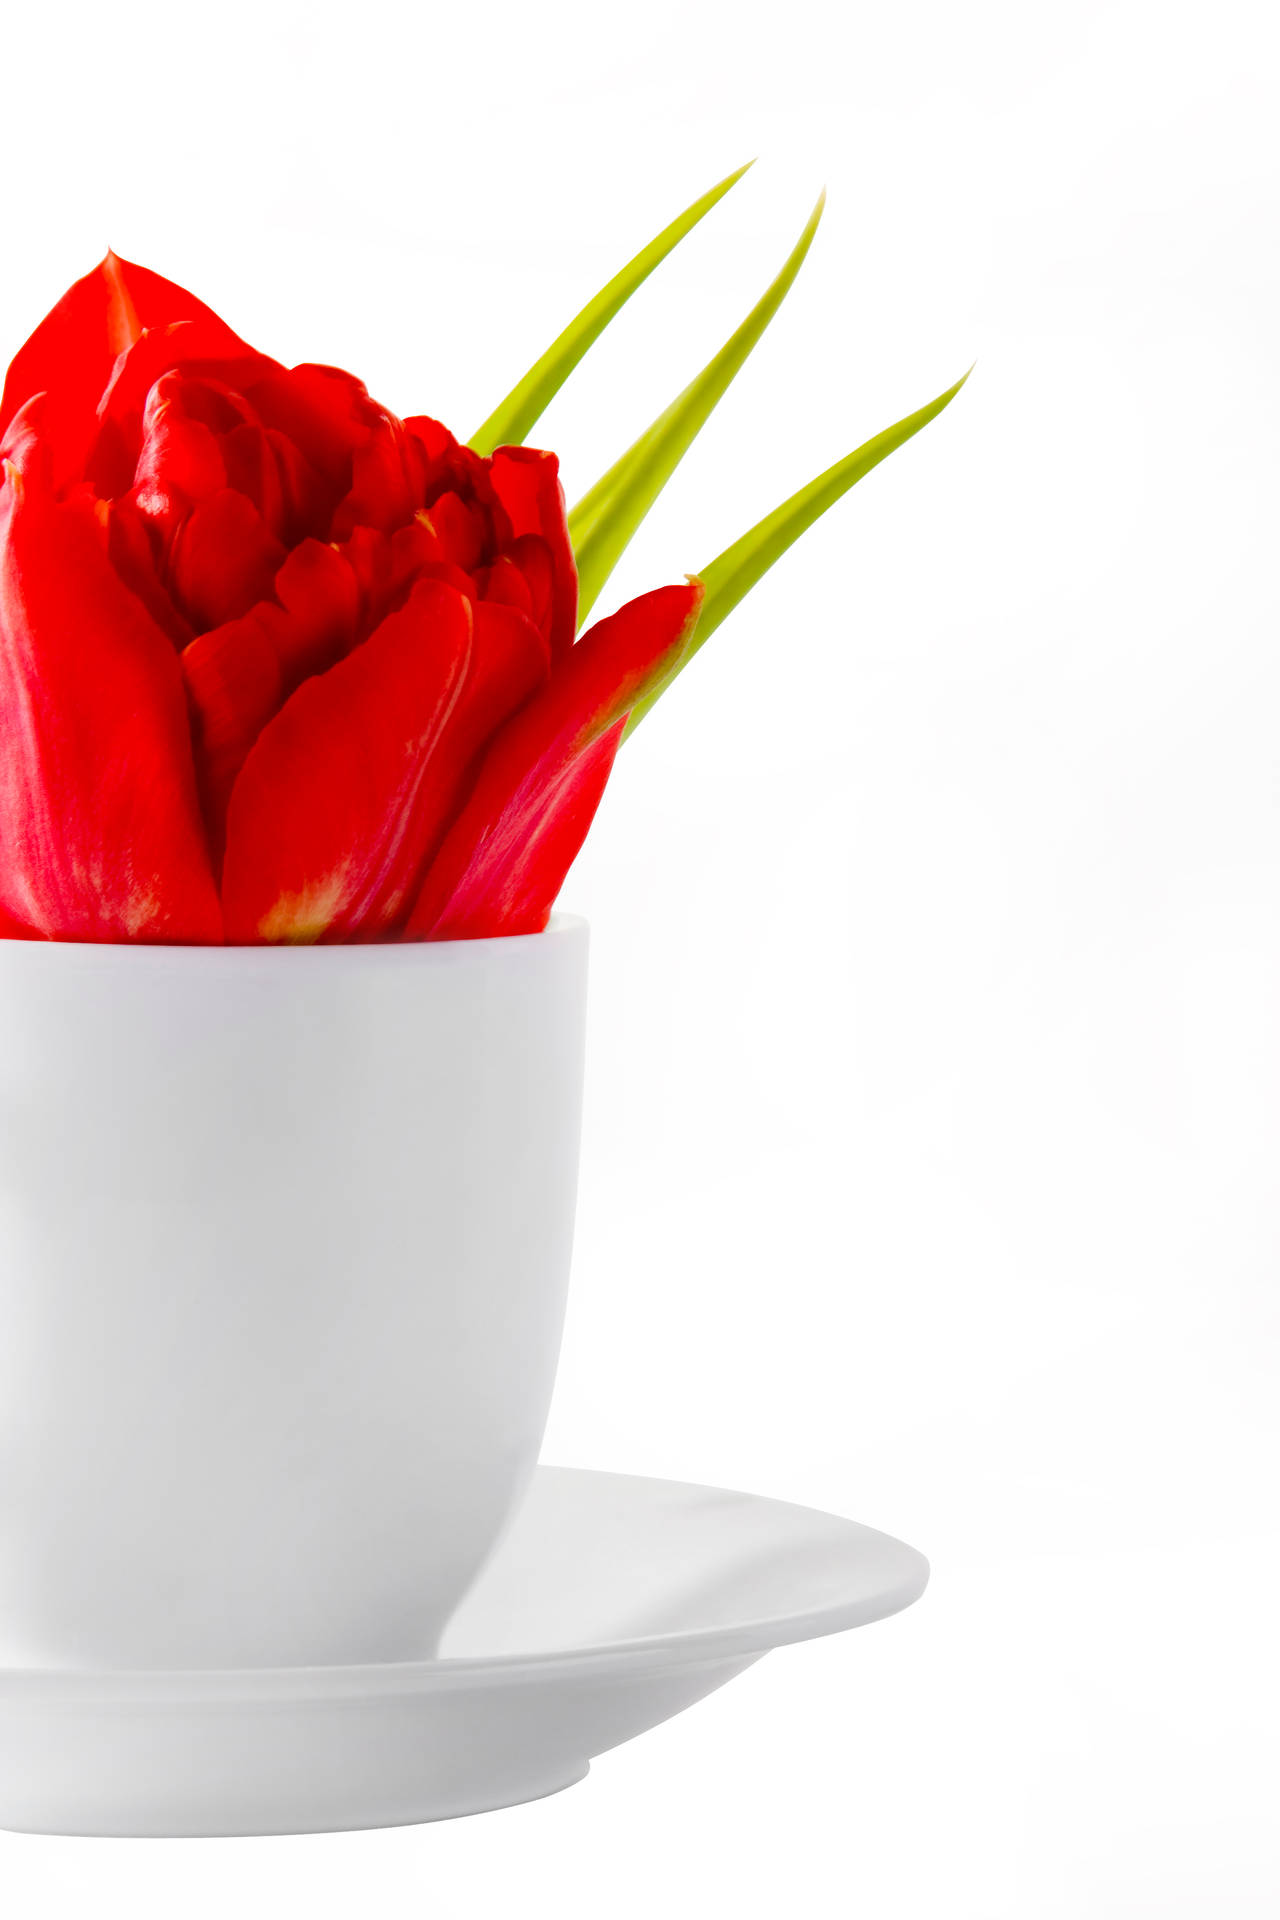 Red Tulip For Mothers Day Background